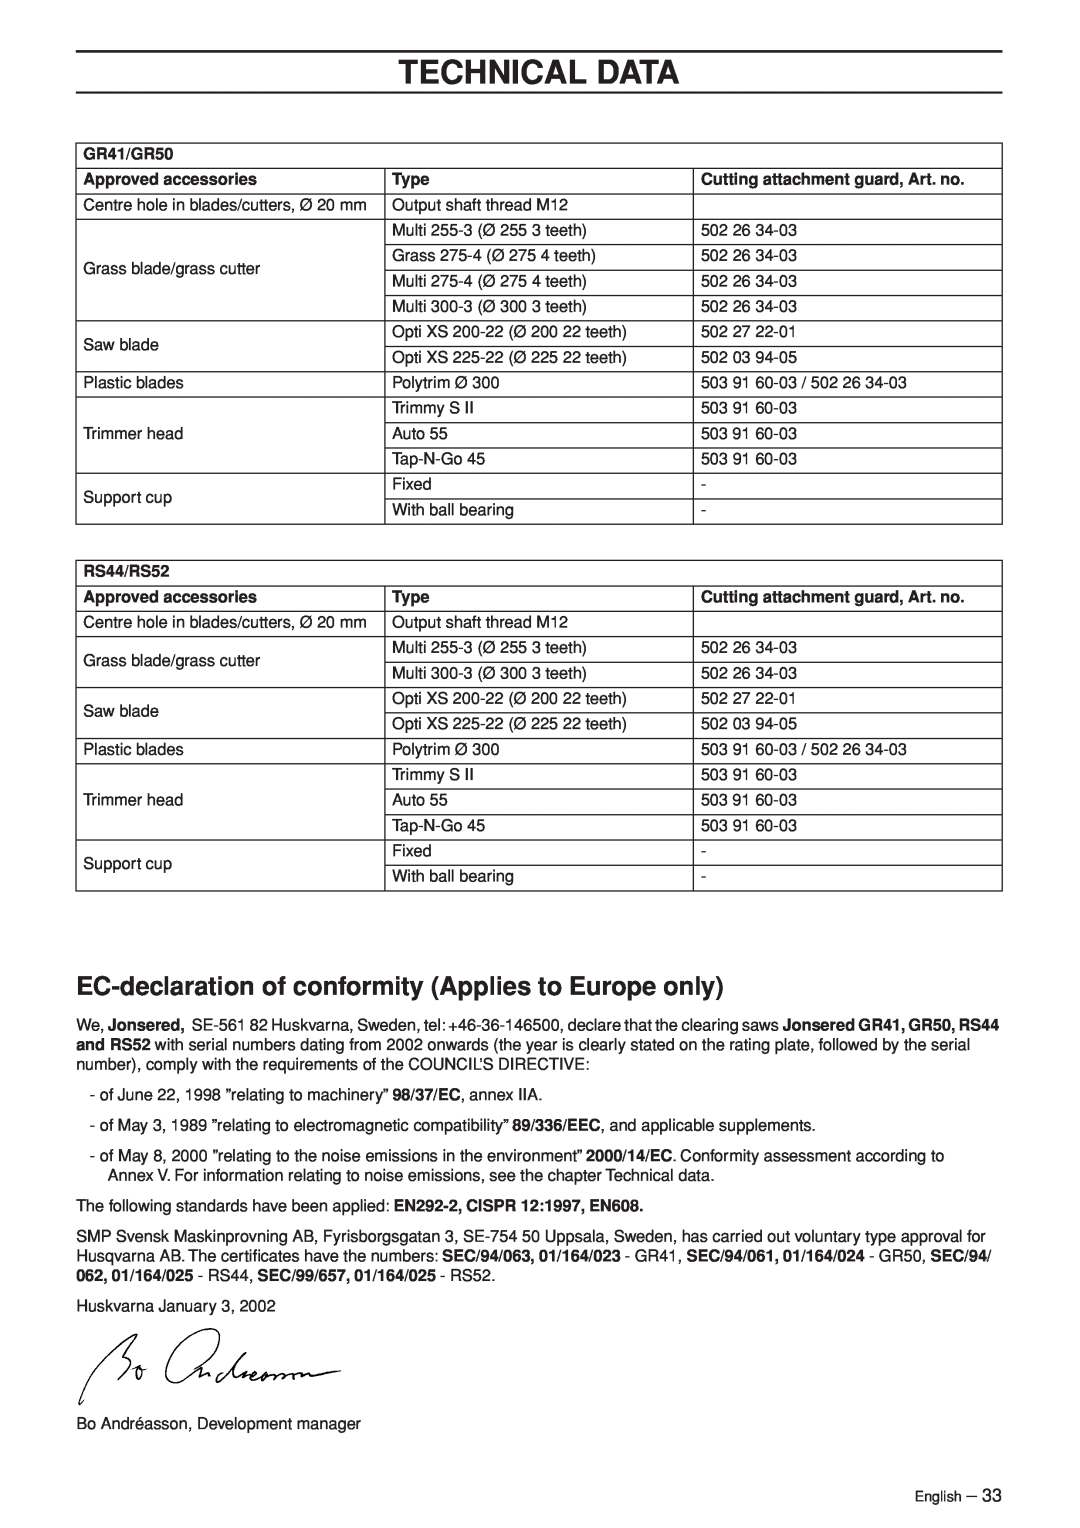 Husqvarna manual EC-declaration of conformity Applies to Europe only, GR41/GR50, Approved accessories, Type, RS44/RS52 